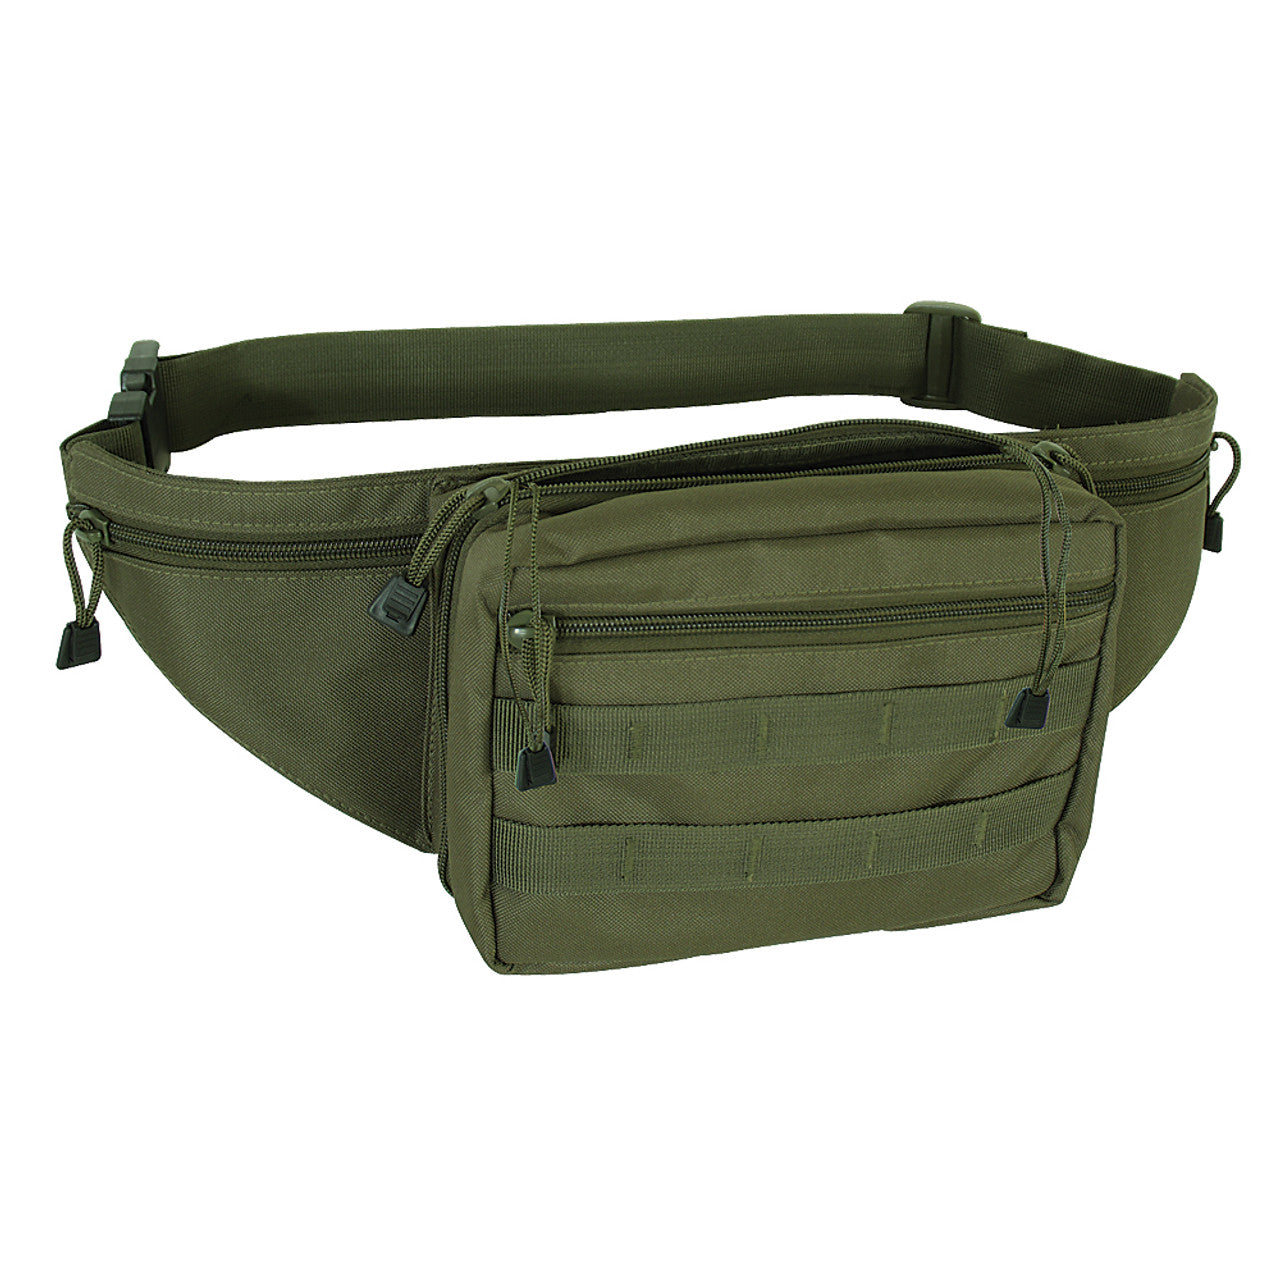 Voodoo Tactical Hide-A-Weapon Fanny pack 15-9316 - Fanny Packs